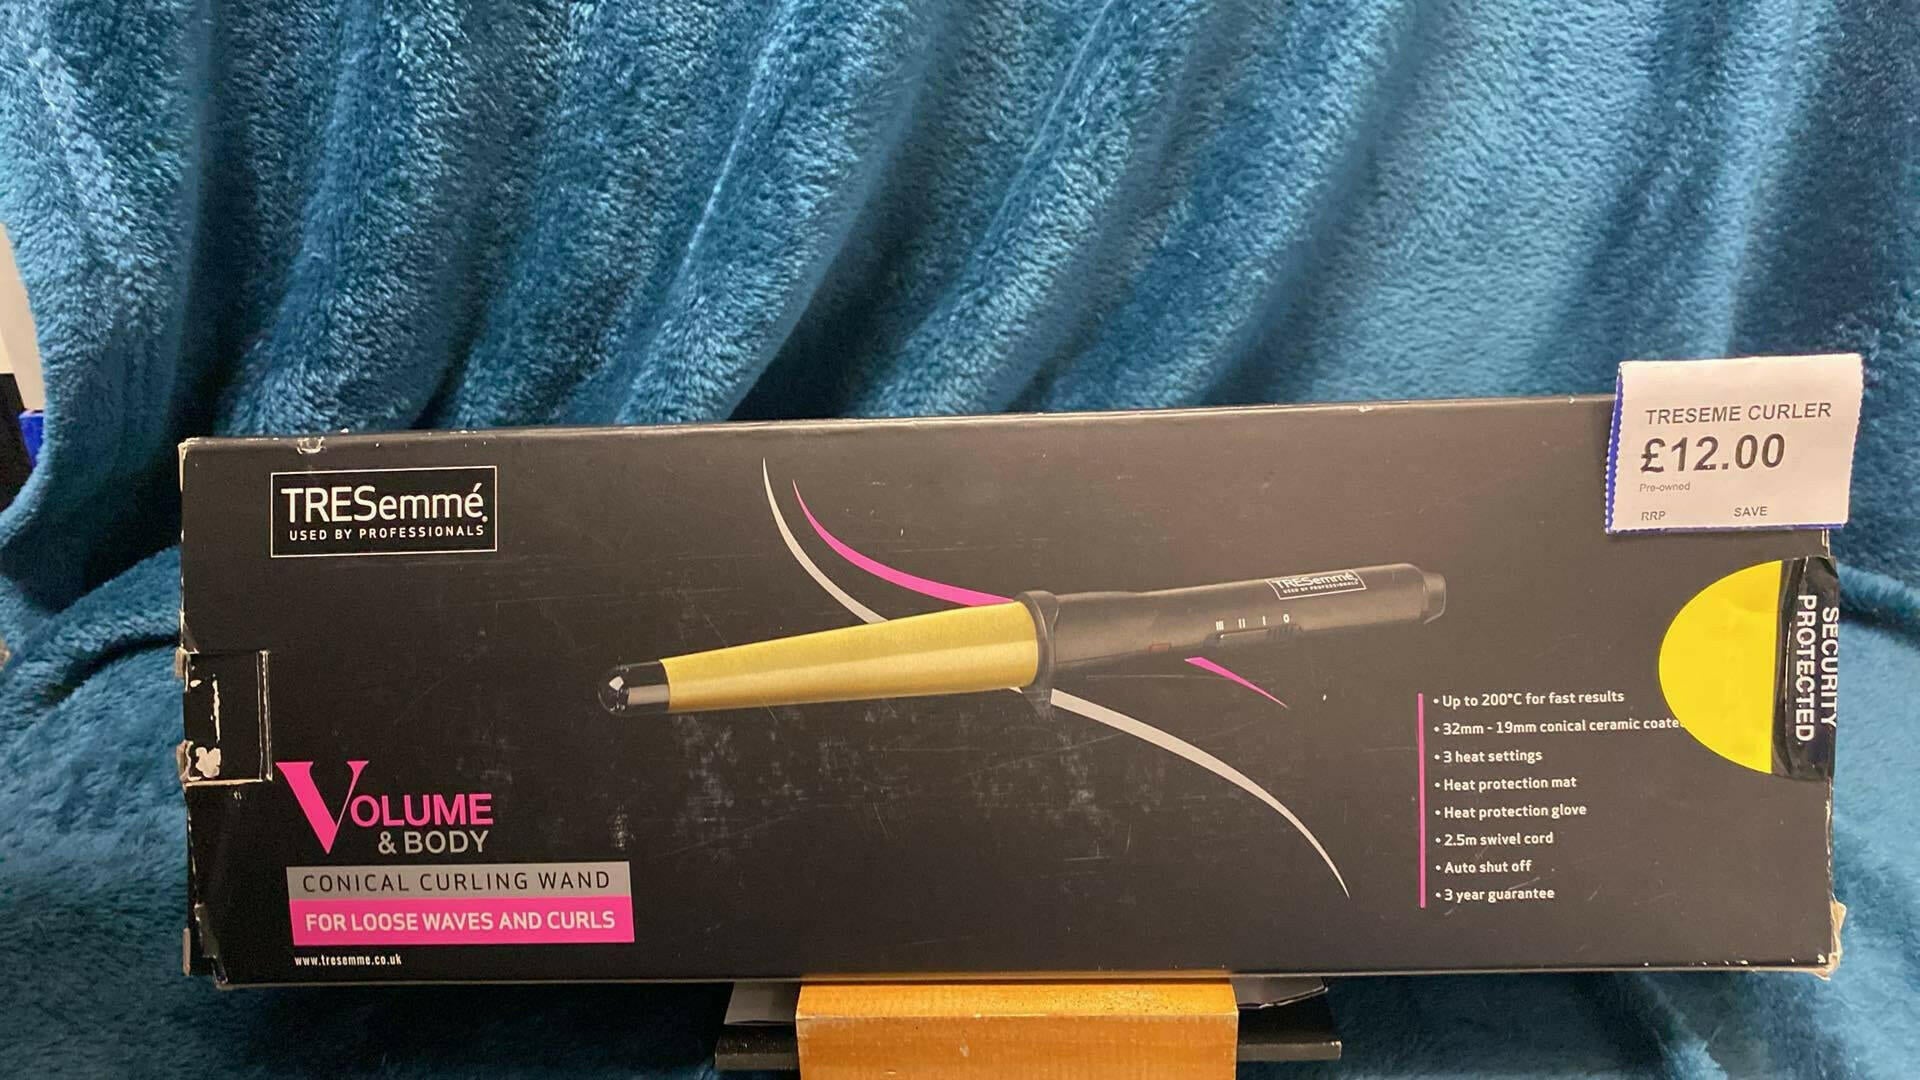 TRESemme Curling wand